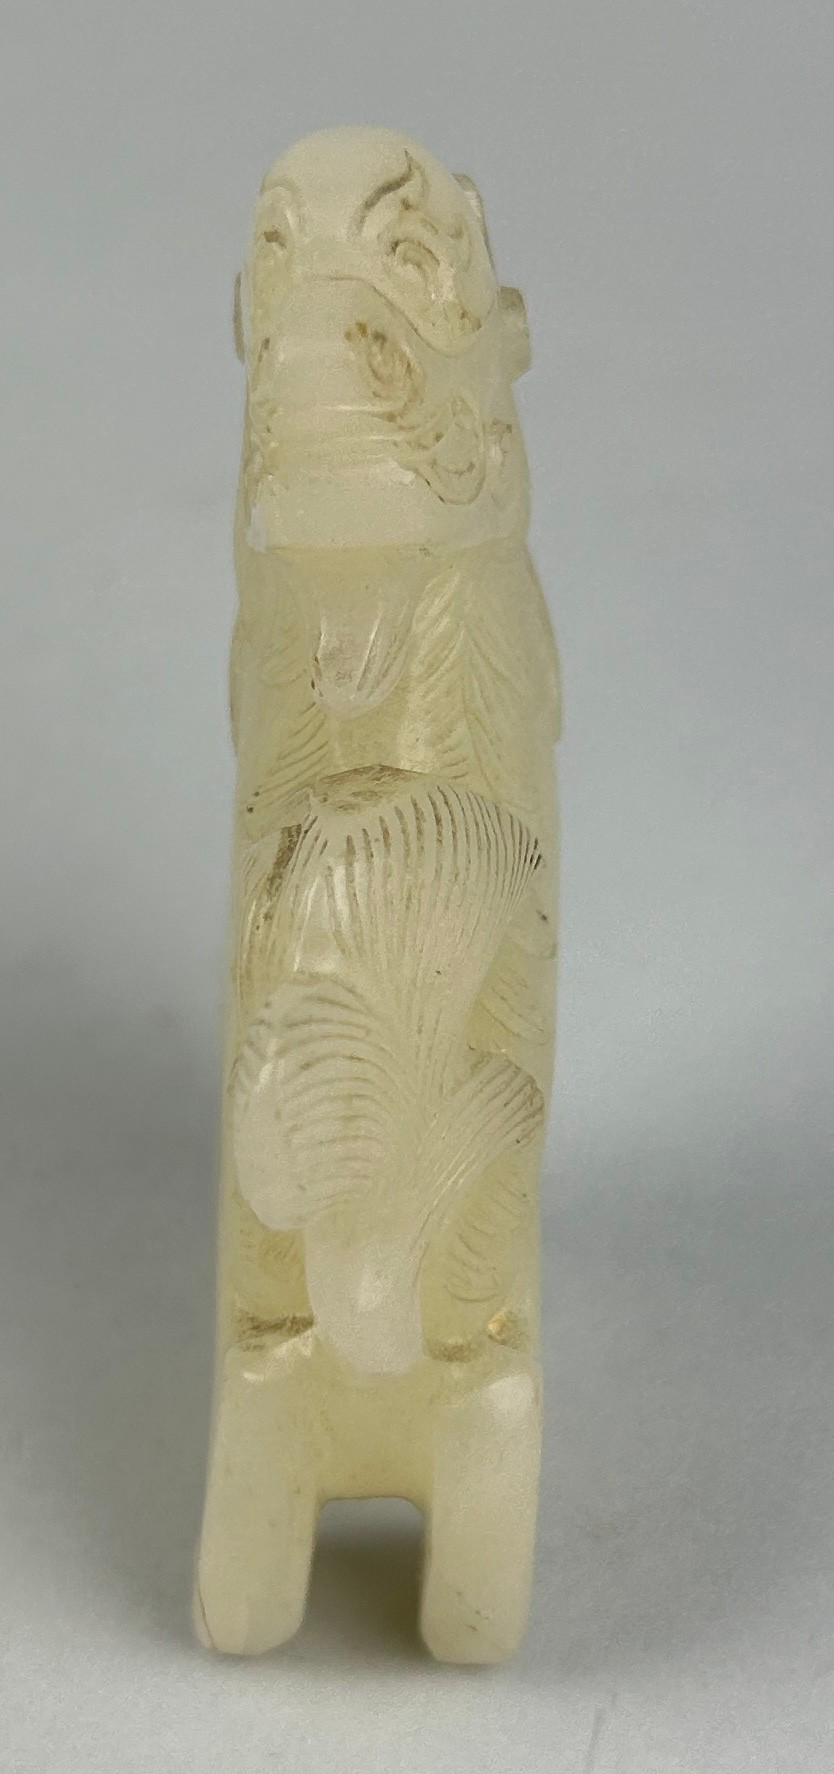 AN EARLY 19TH CENTURY CHINESE WHITE JADE GROUP OF A LION, 7.5cm x 4.7cm x 1.8cm - Image 3 of 4